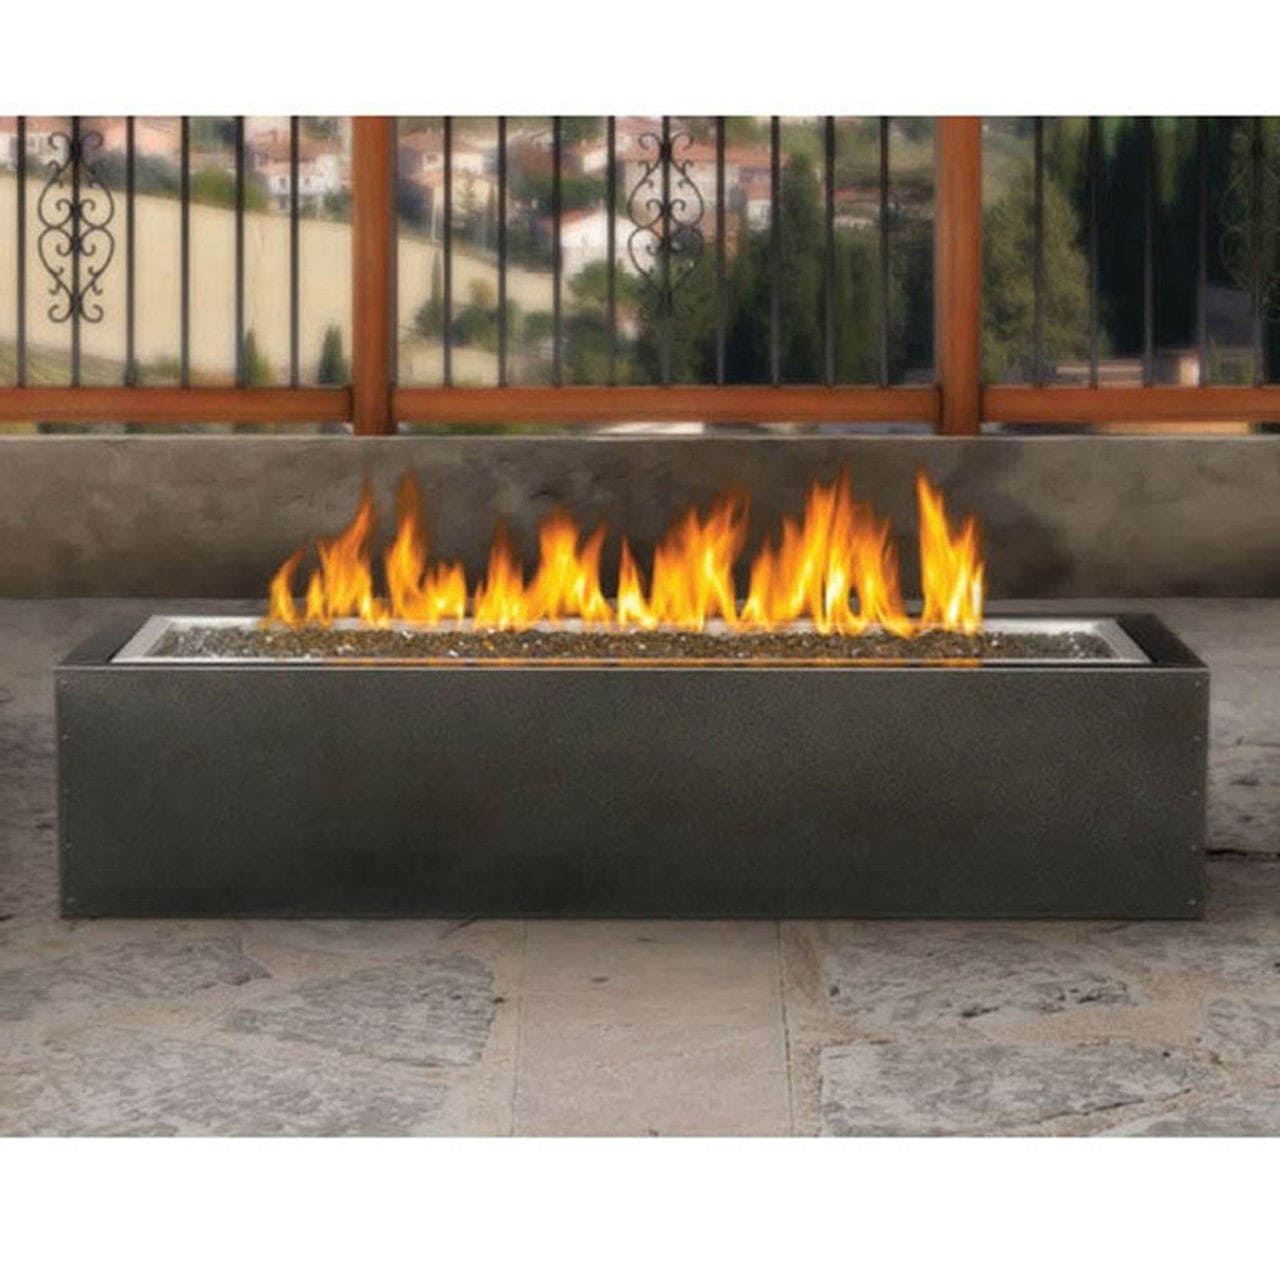 Linear Patioflame Outdoor Propane Fireplace - GPFL48MHP - Chimney Cricket